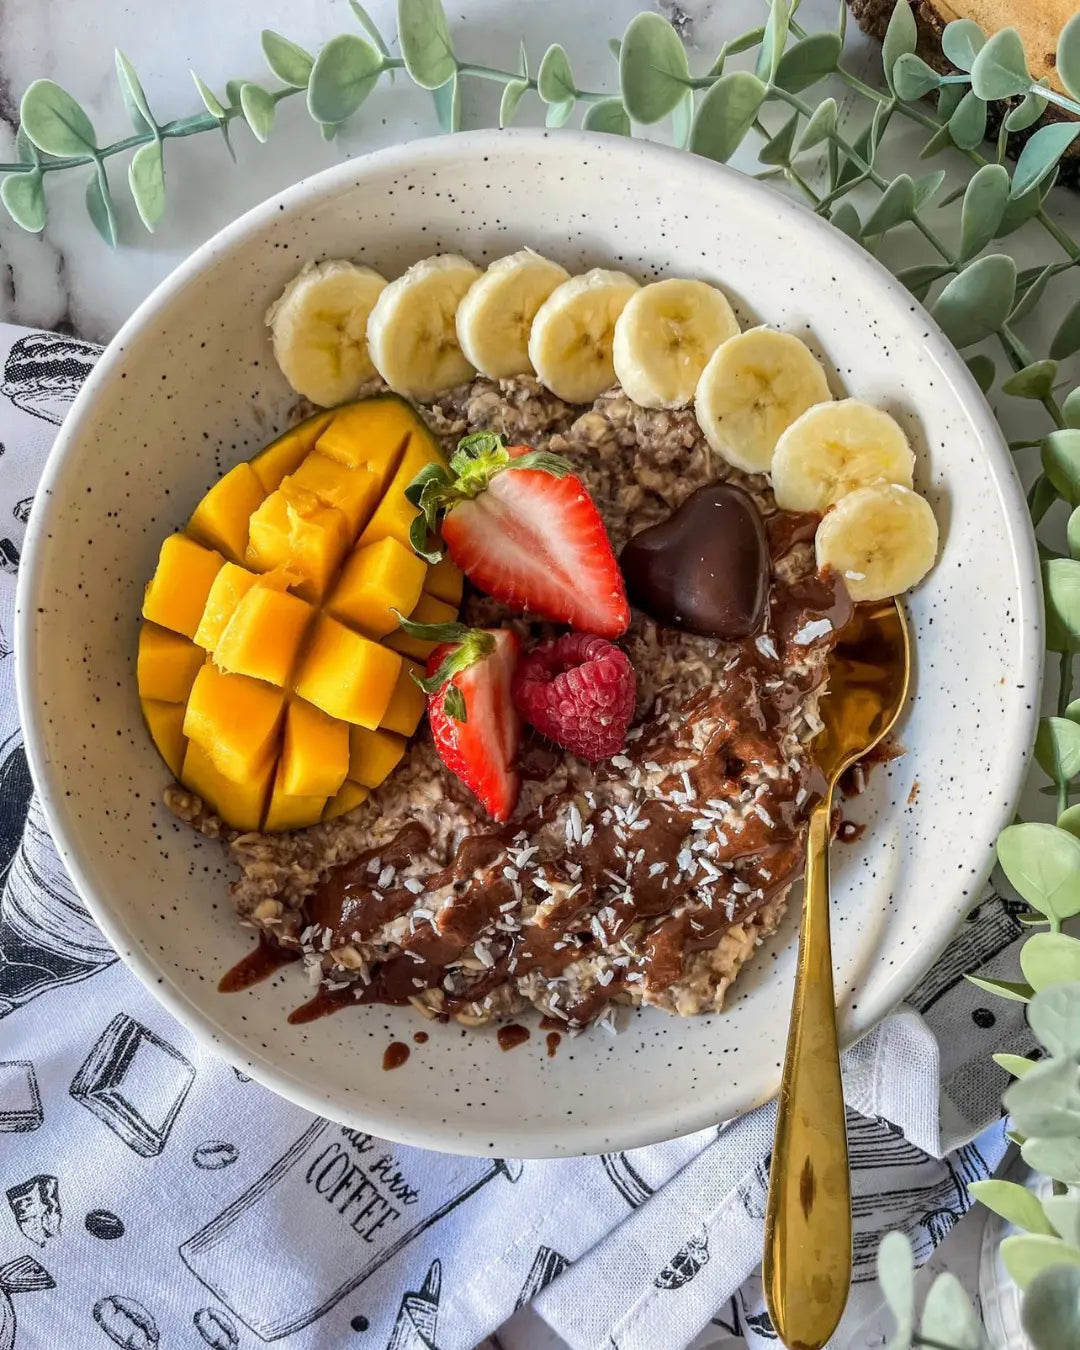 Chocolate banana protein oatmeal with fresh toppings and flax seed and chia seed.